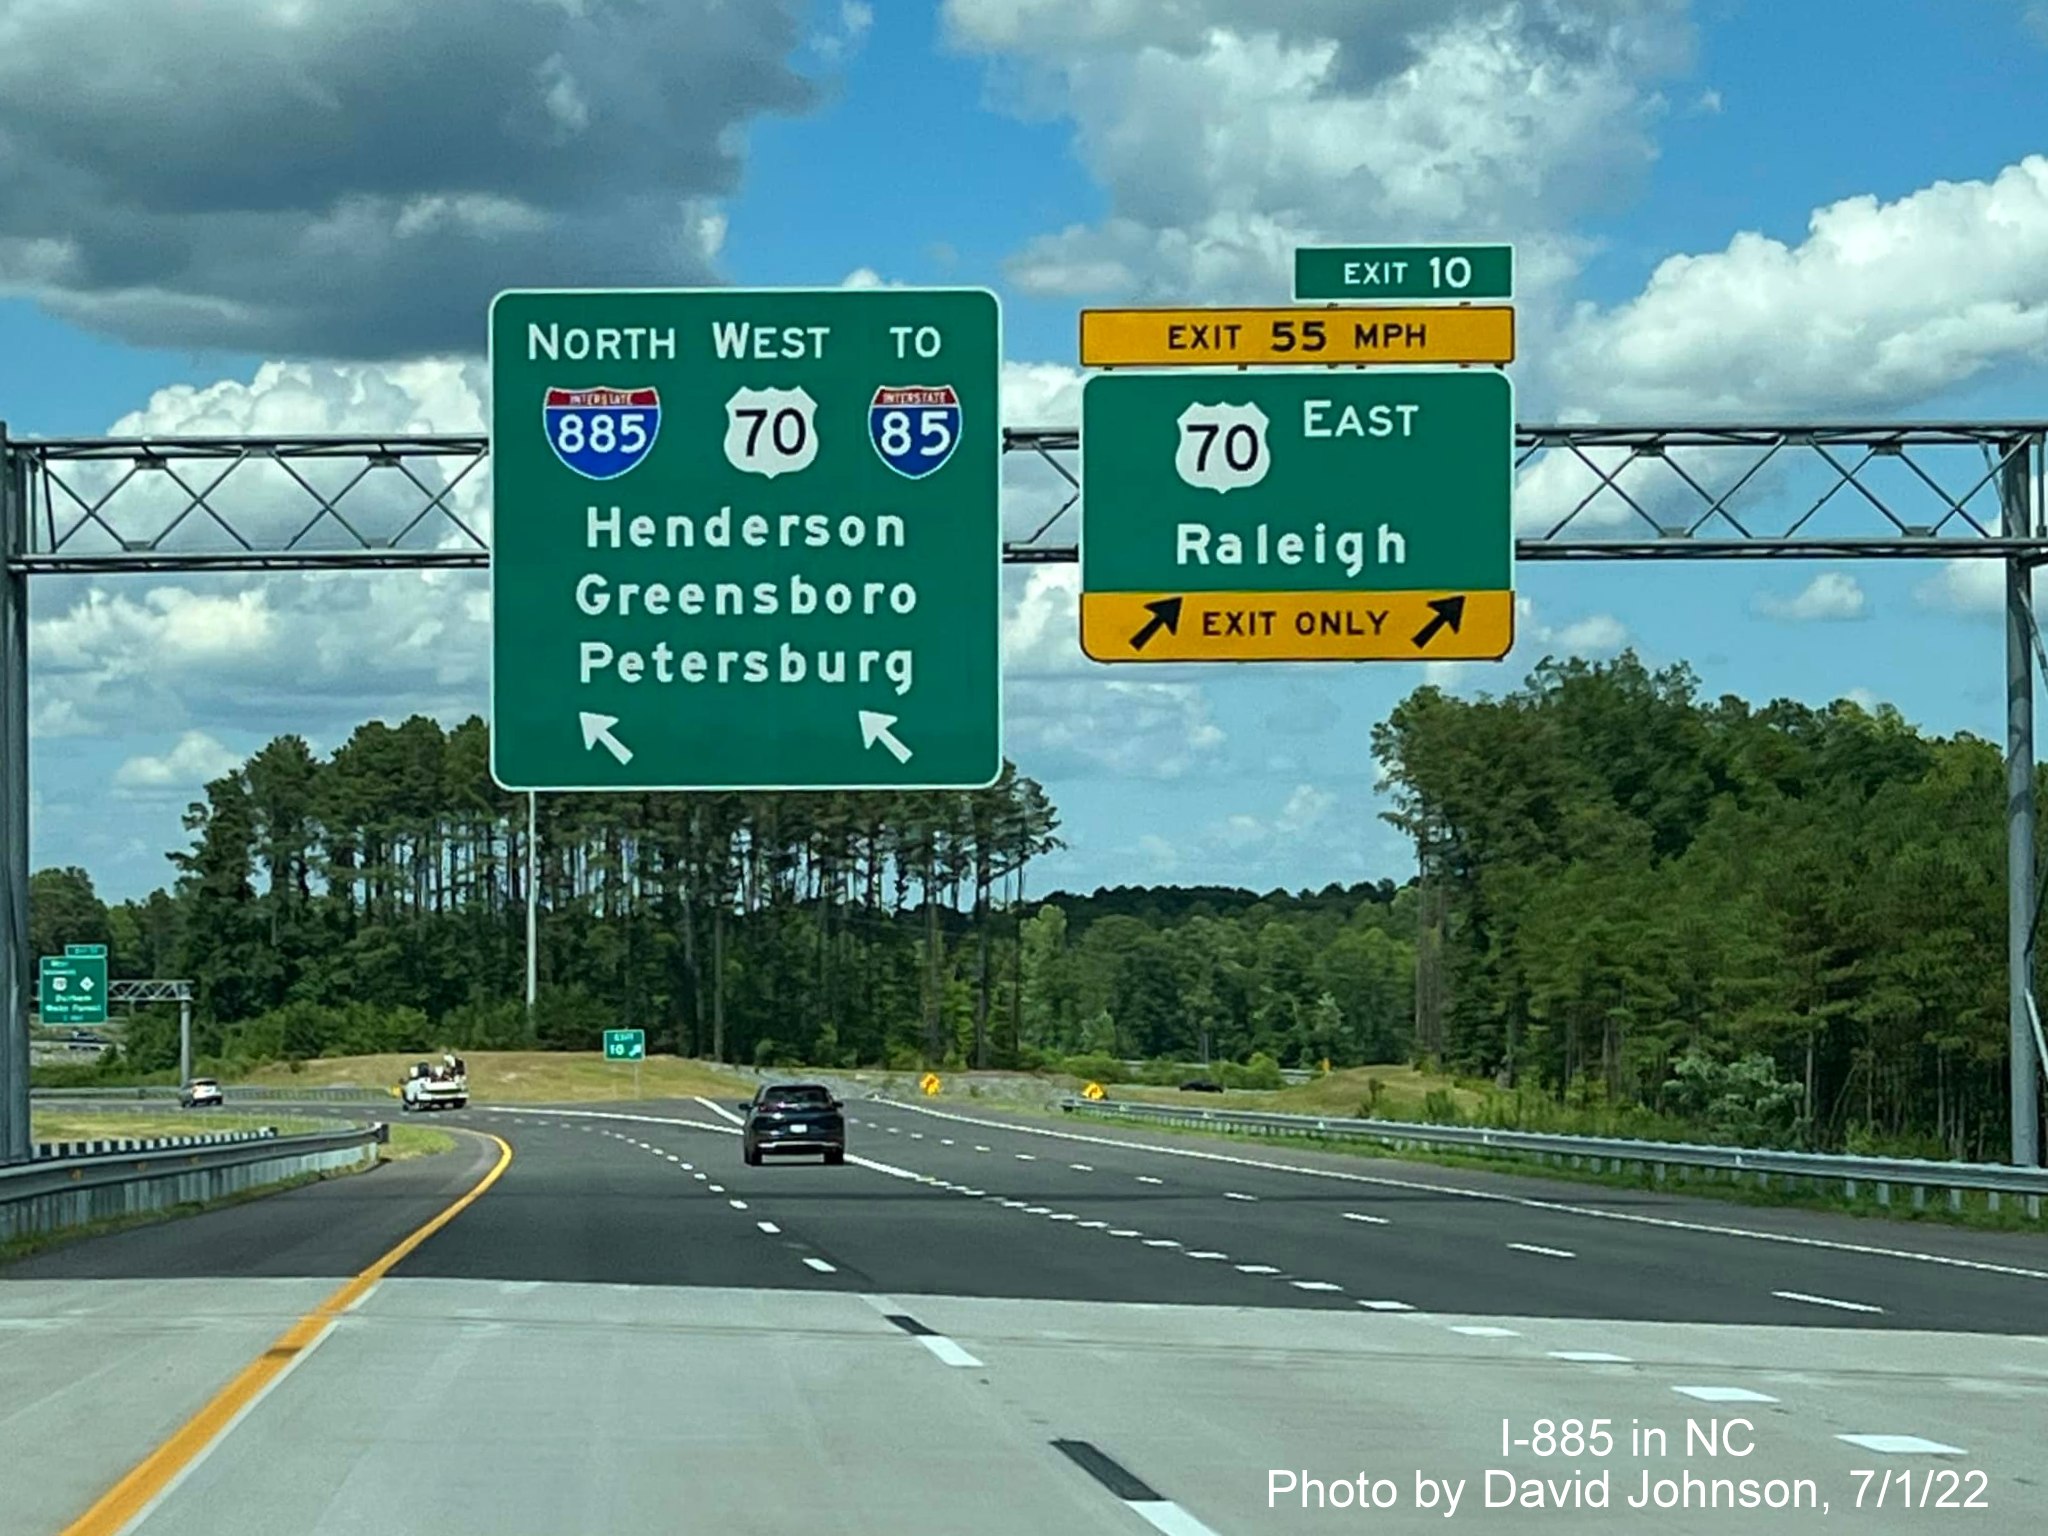 Image of overhaed signage on I-885 North/East End Connector ramp at US 70 East exit, by David Johnson July 2022